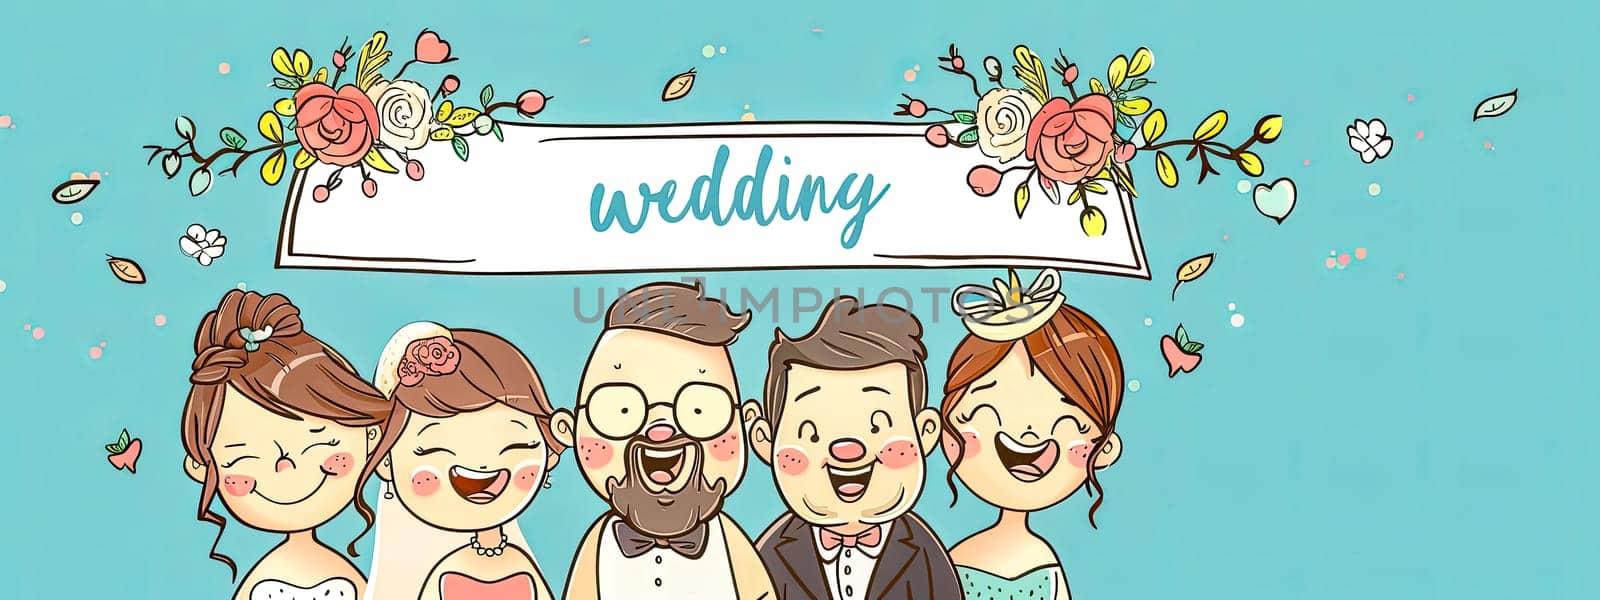 Charming illustrated wedding banner with a cartoon bridal party